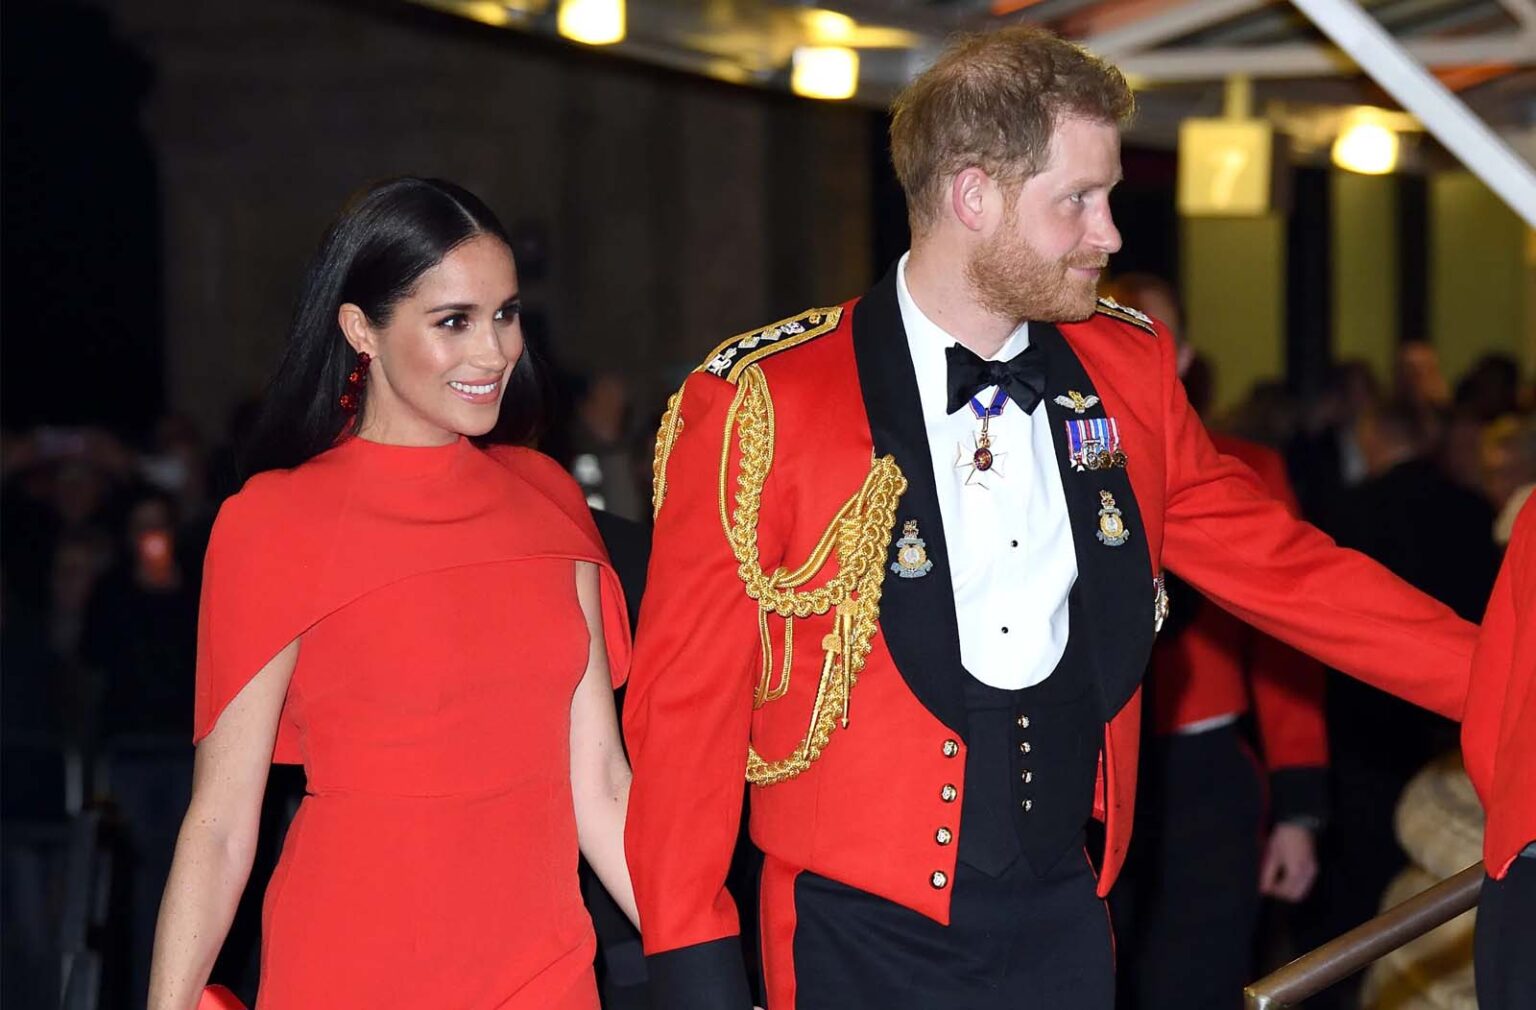 Meghan Markle and Prince Harry have stepped away from the royal family and now live in the U.S. Will they be allowed to retain their royal titles?